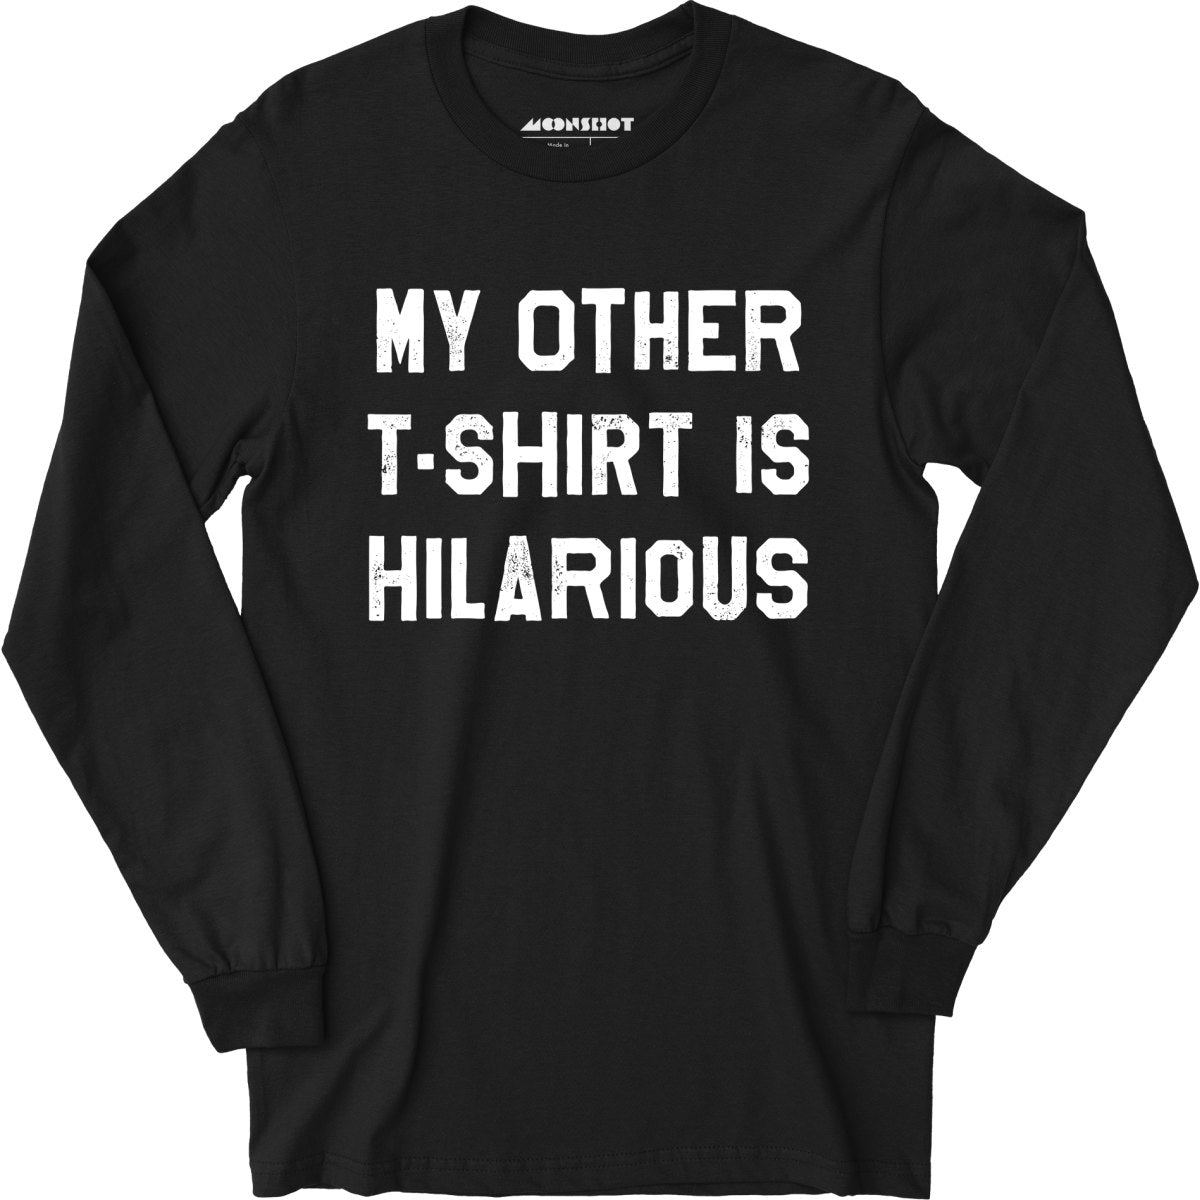 My Other T-Shirt is Hilarious - Long Sleeve T-Shirt